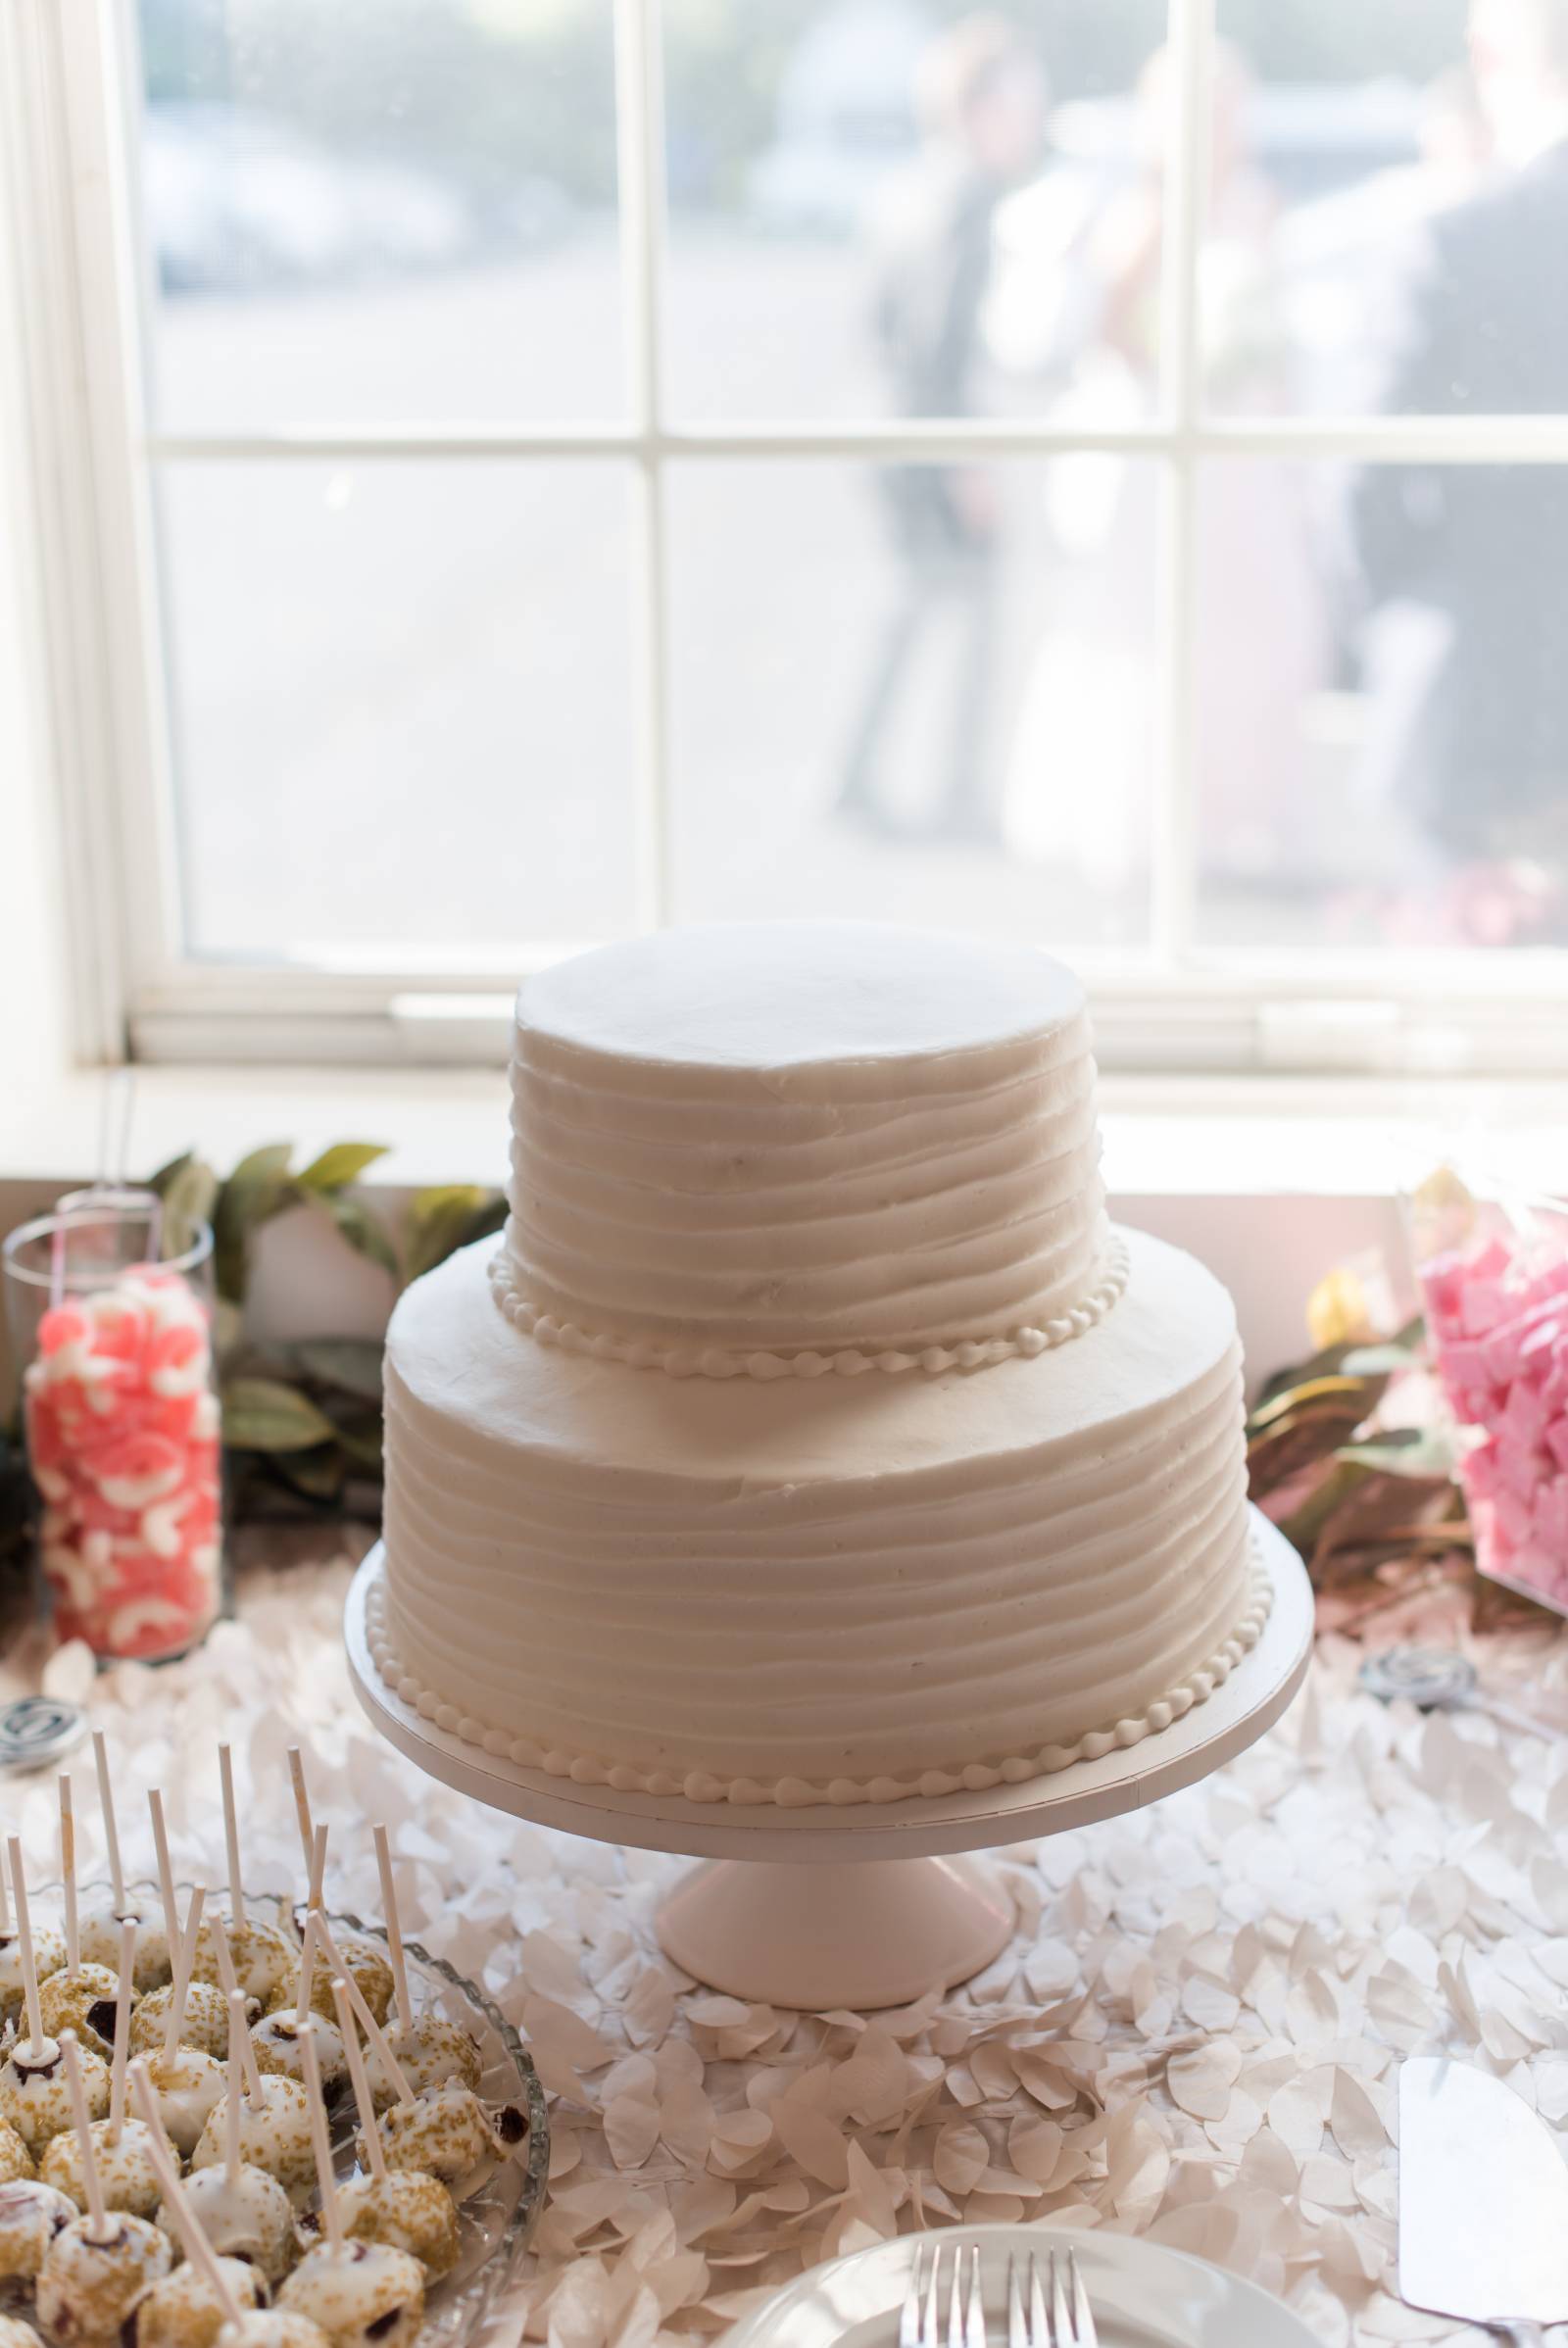 Classic two-tiered plain wedding cake